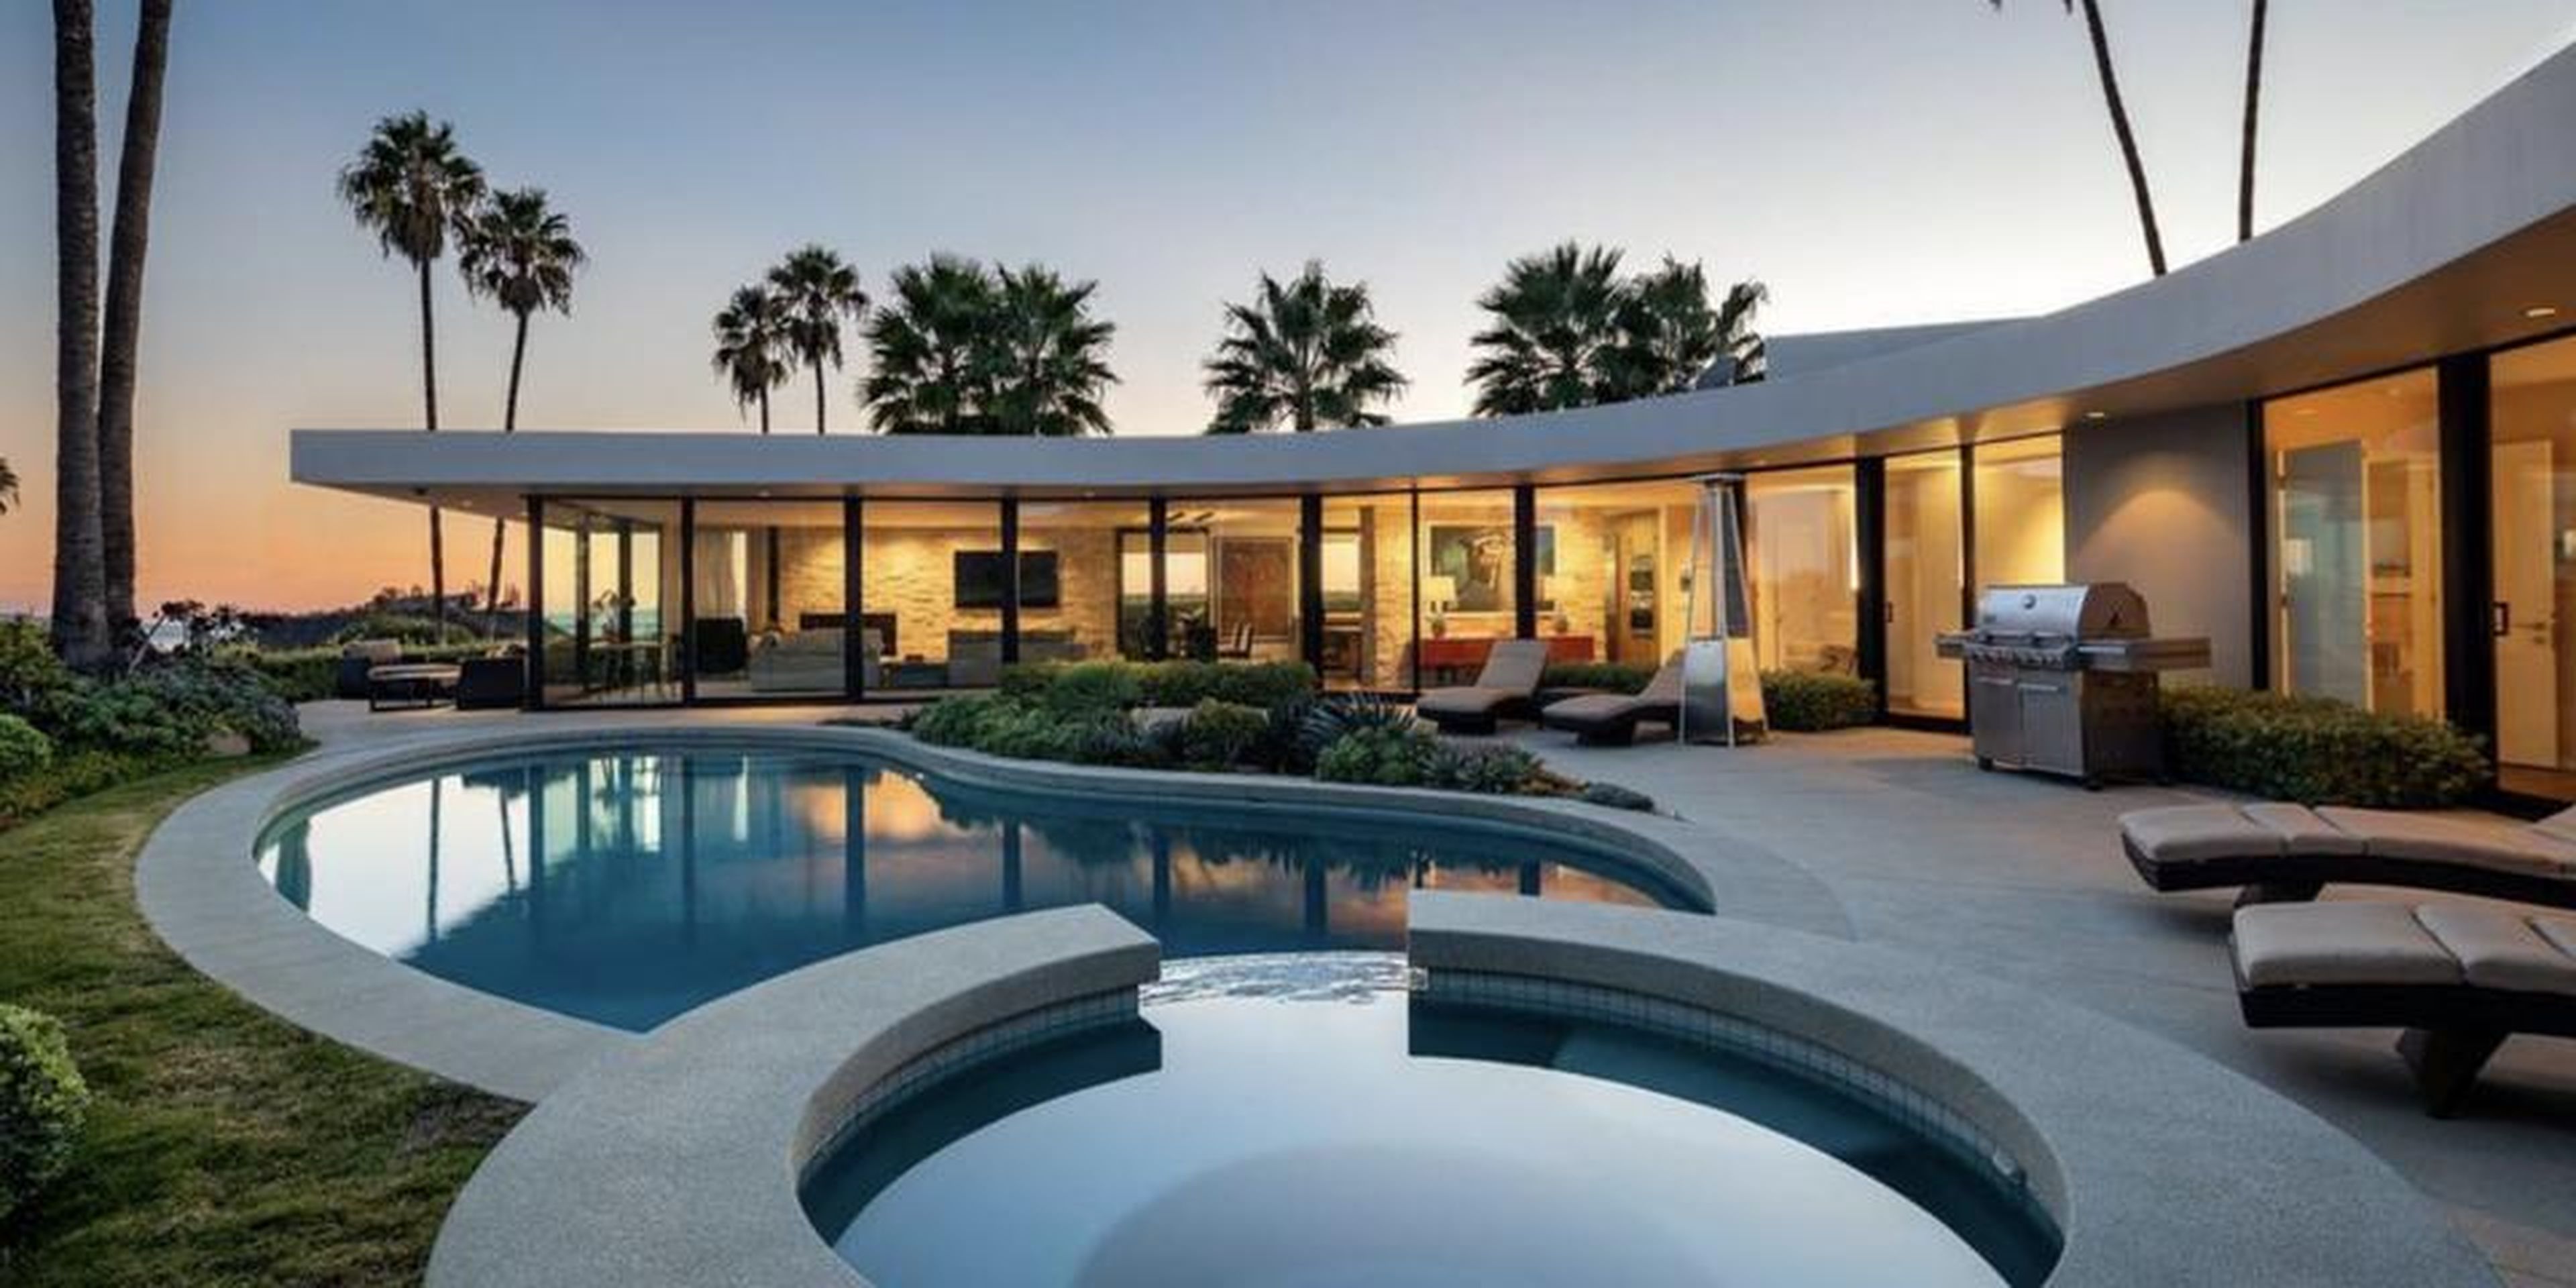 Elon Musk is selling his $4.5 million home that overlooks Los Angeles. Here's a look inside